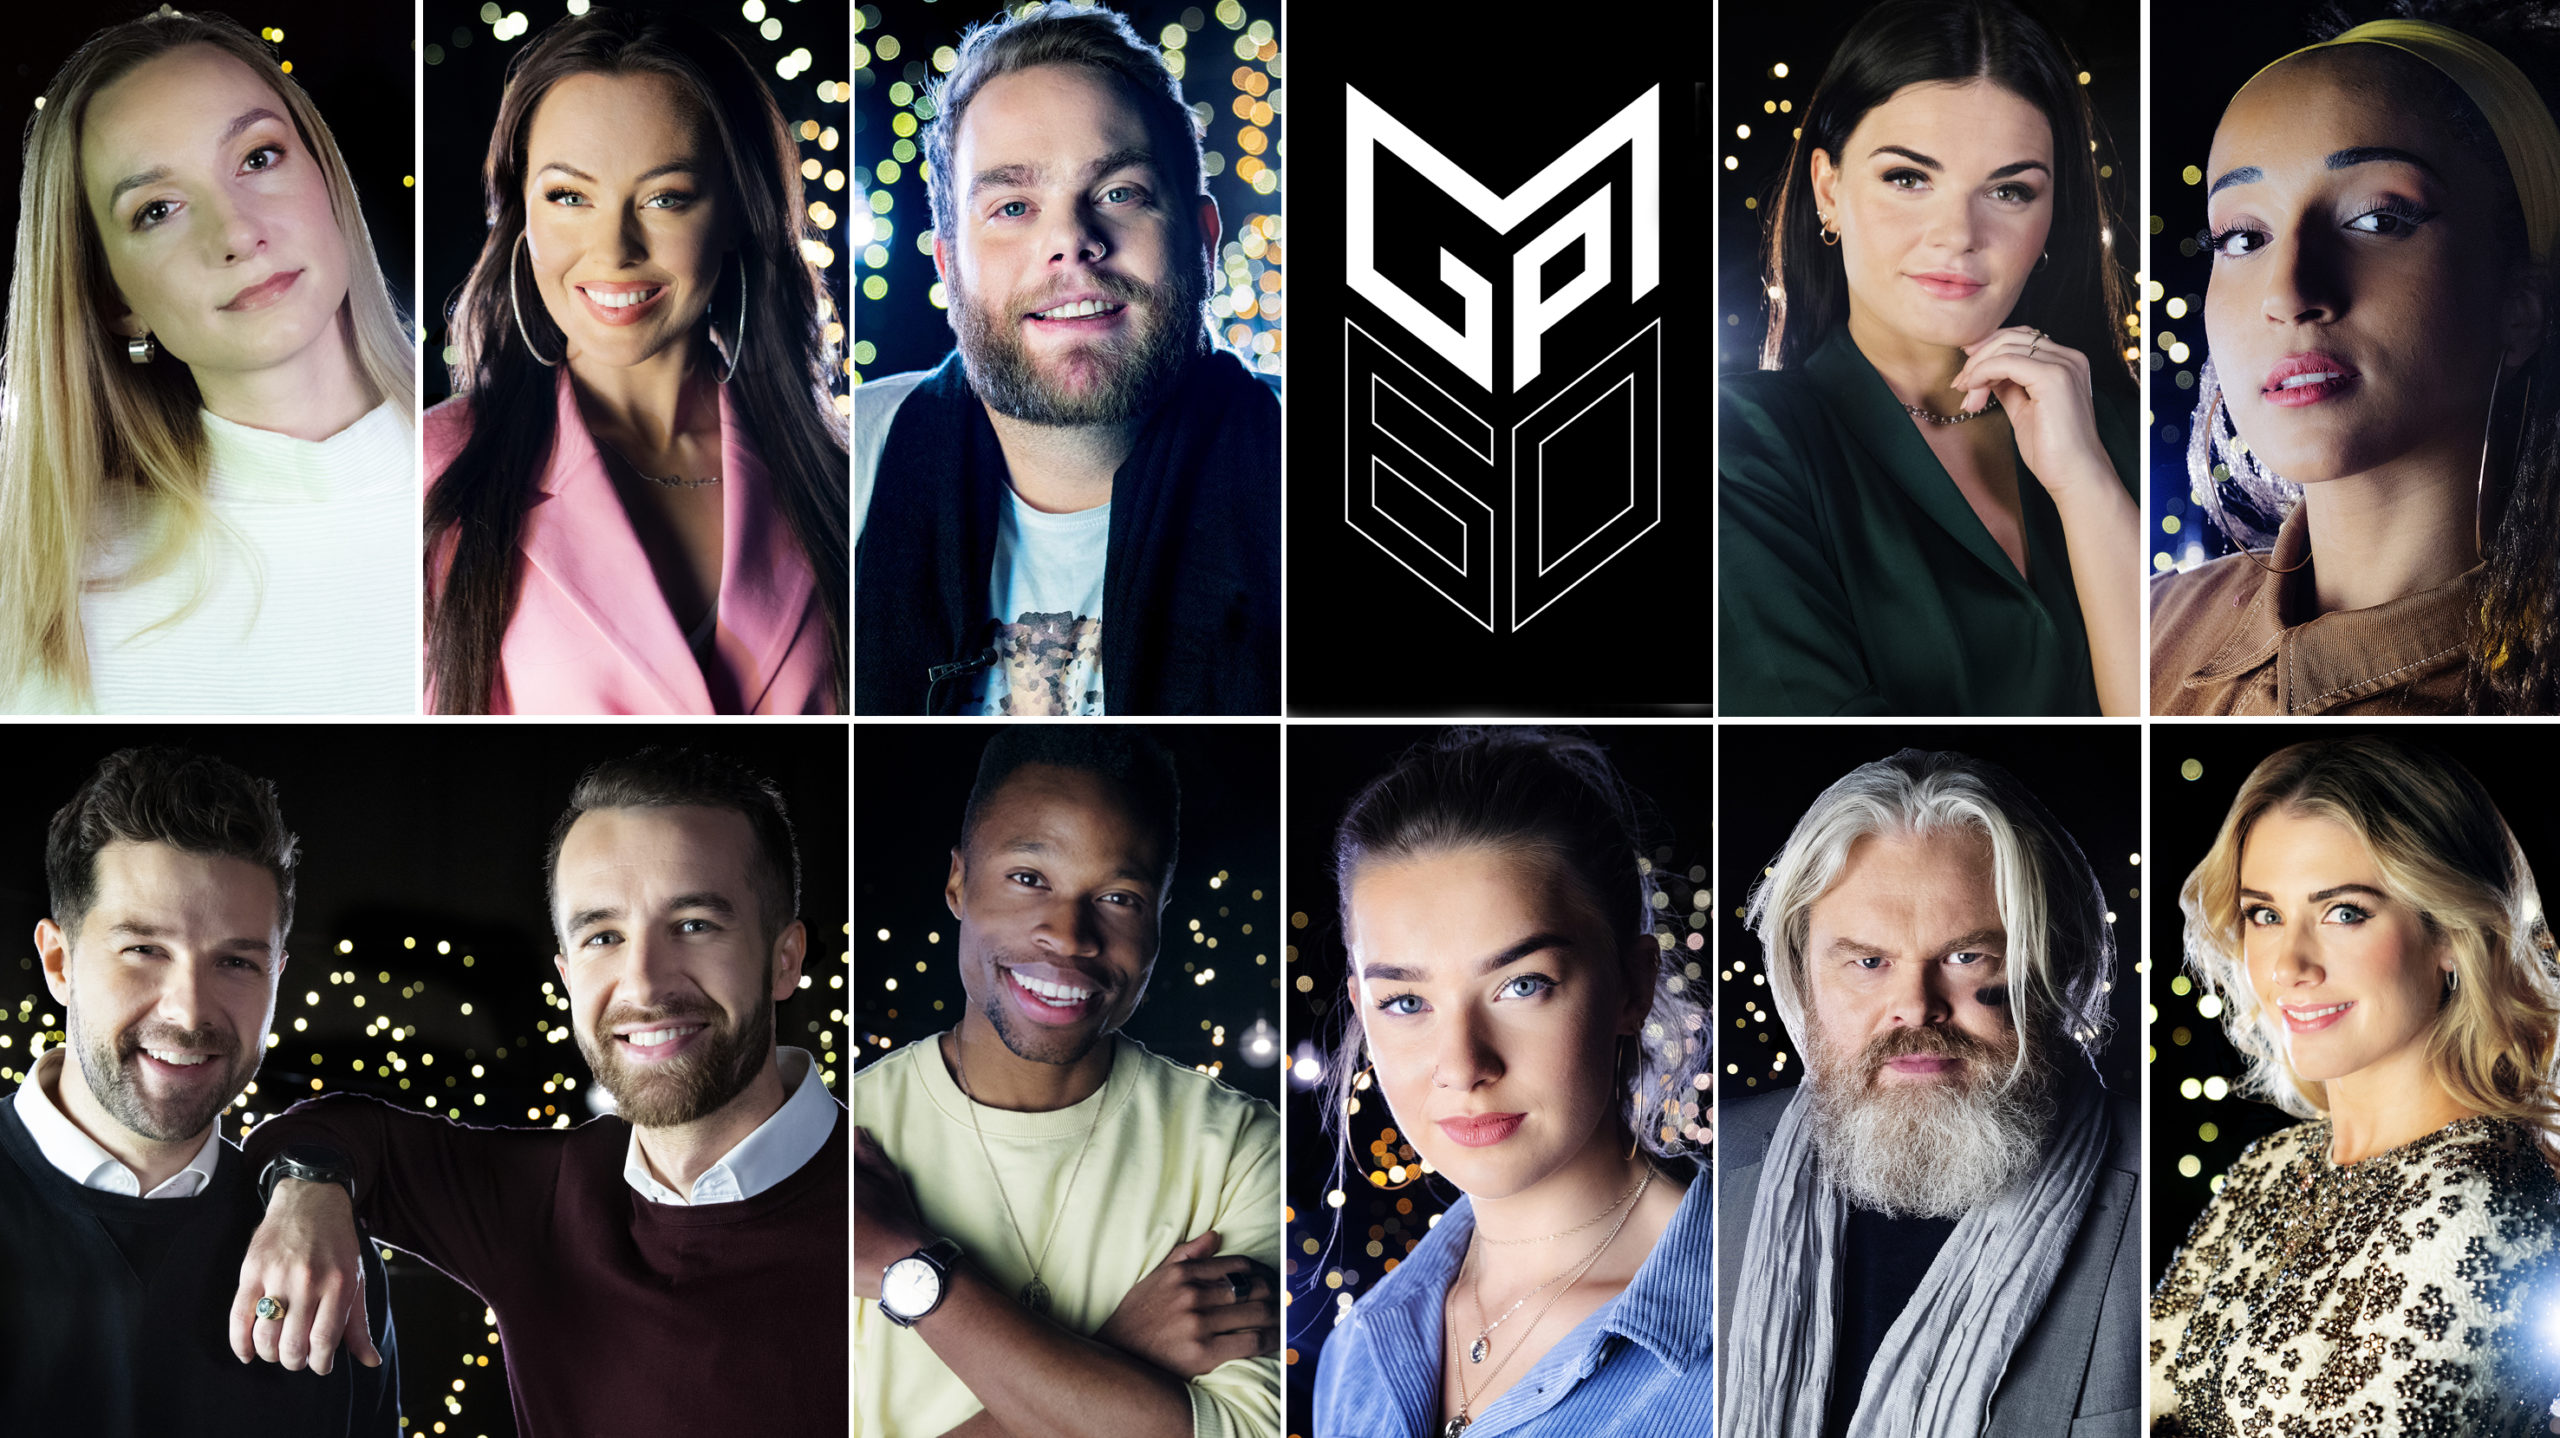 Tonight: Melodi Grand Prix reaches its conclusion live from Trondheim